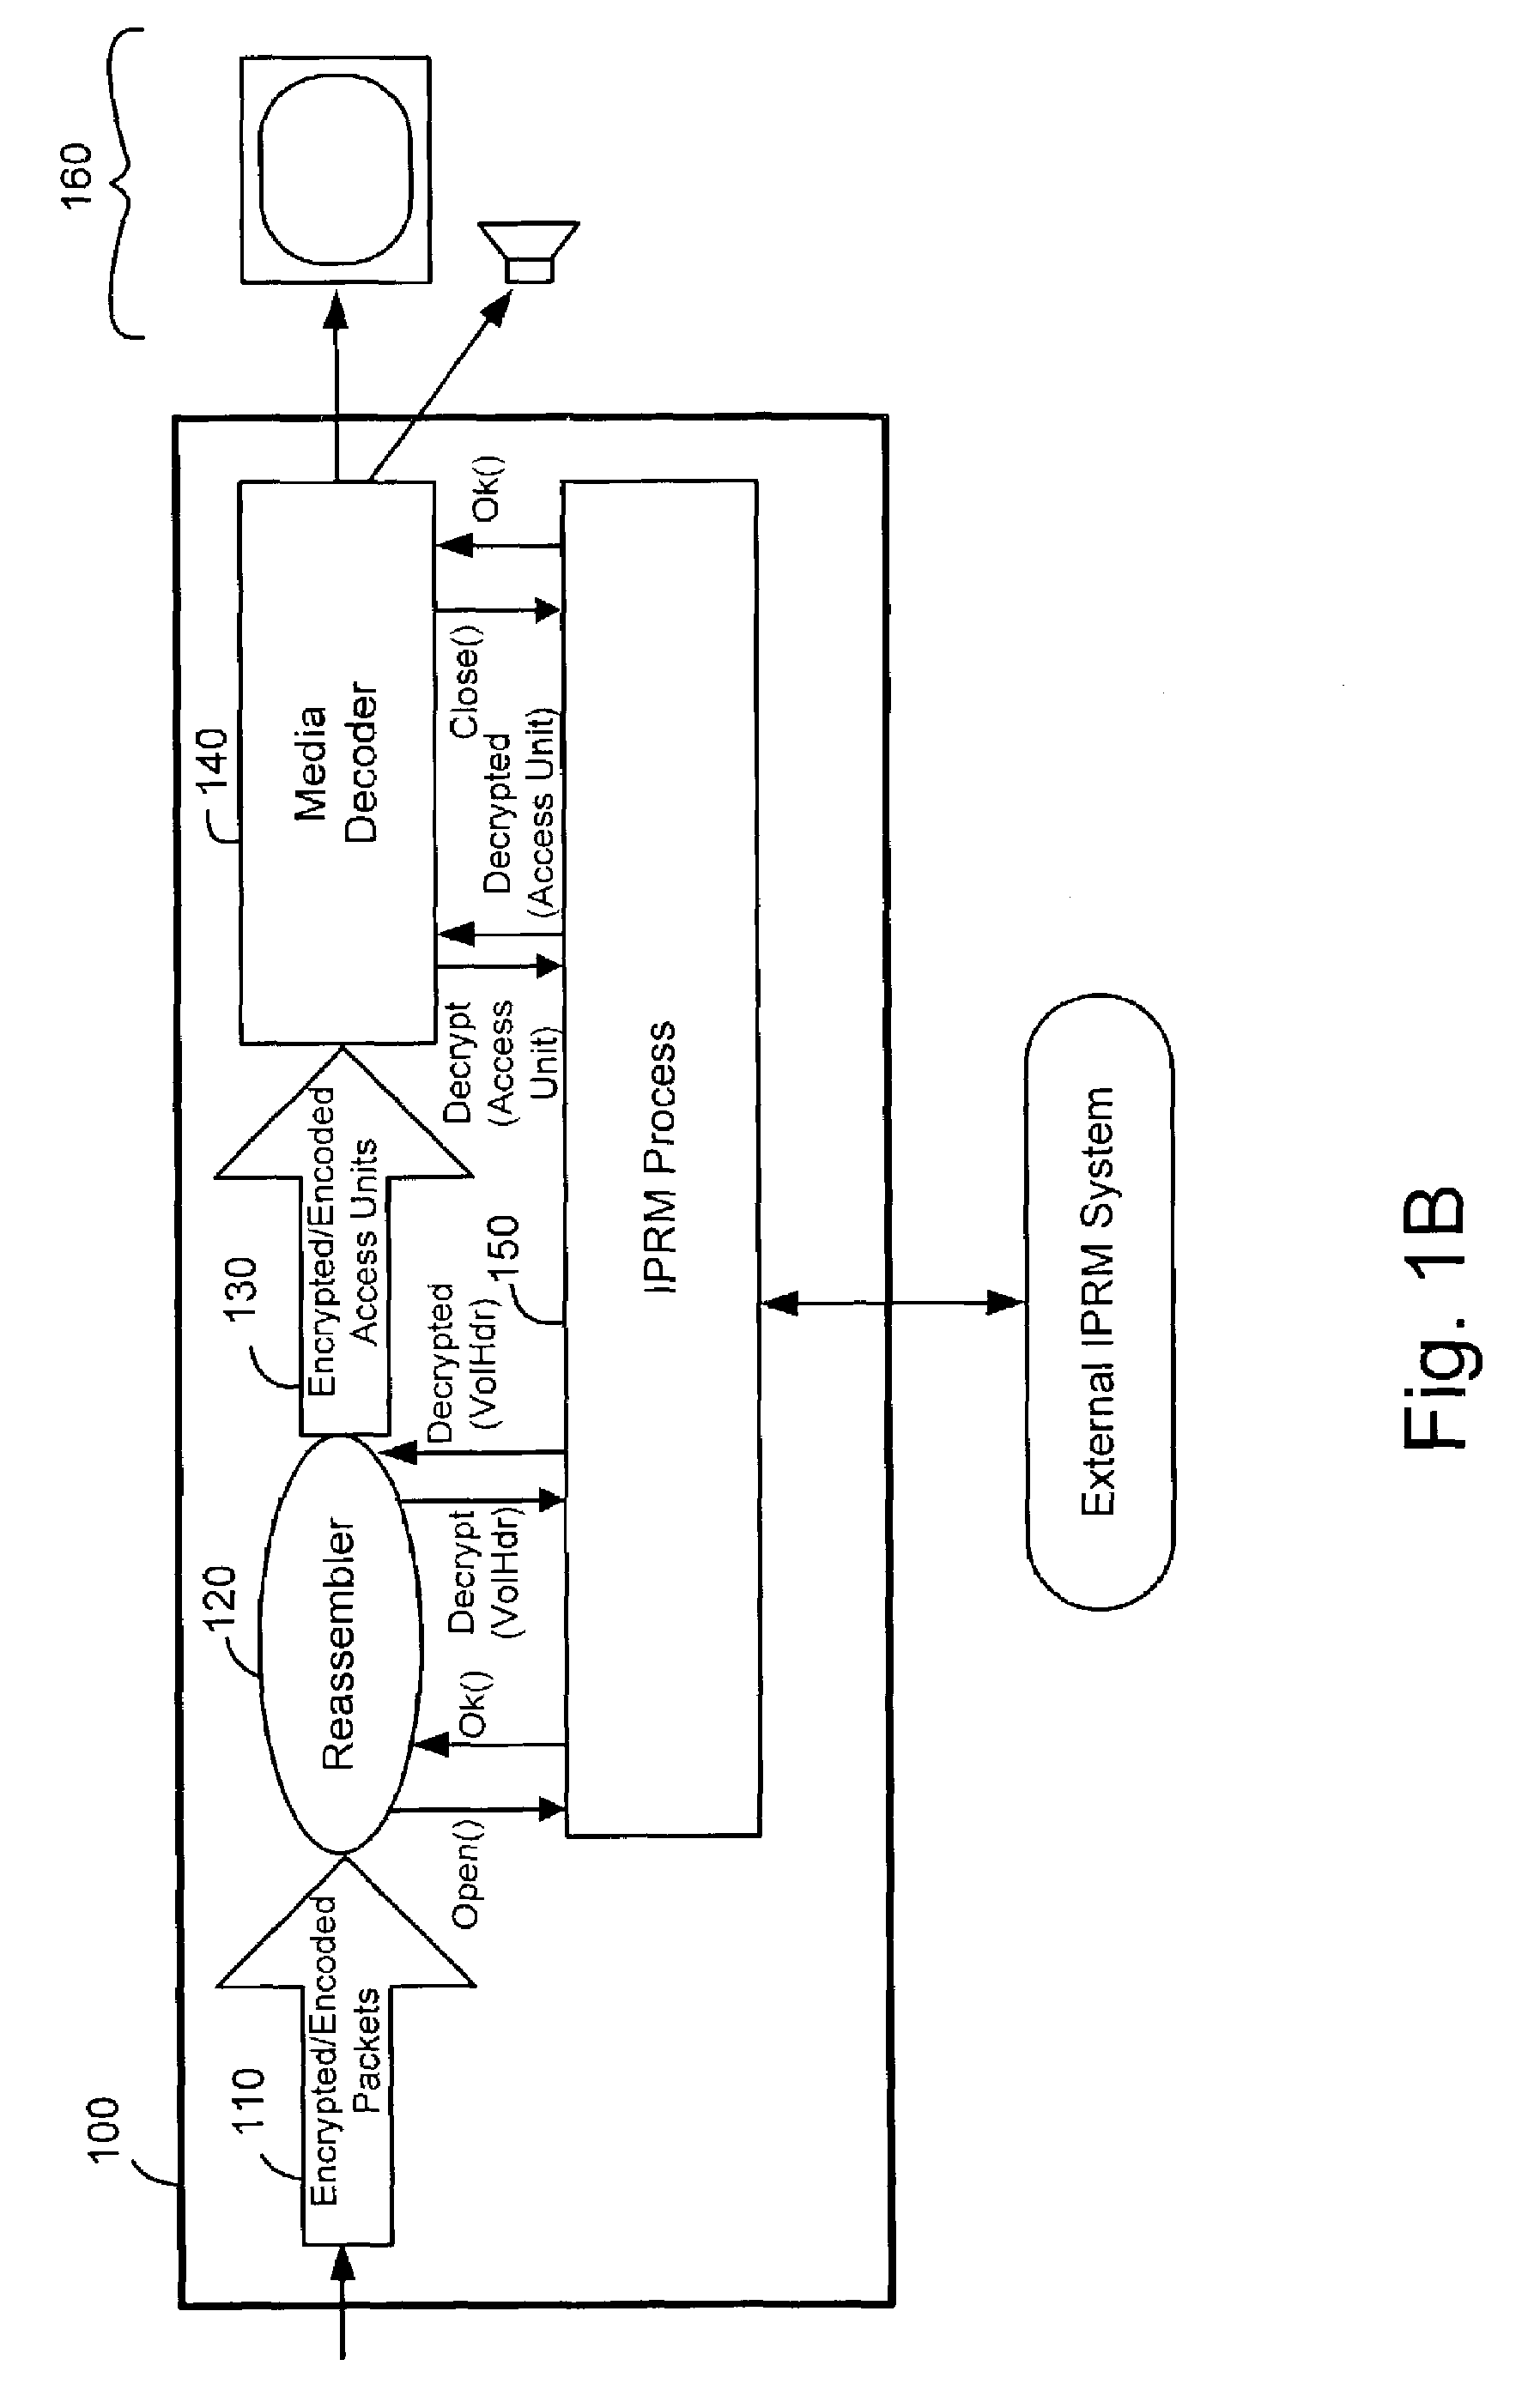 System for secure decryption of streaming media using selective decryption of header information and decryption of reassembled content